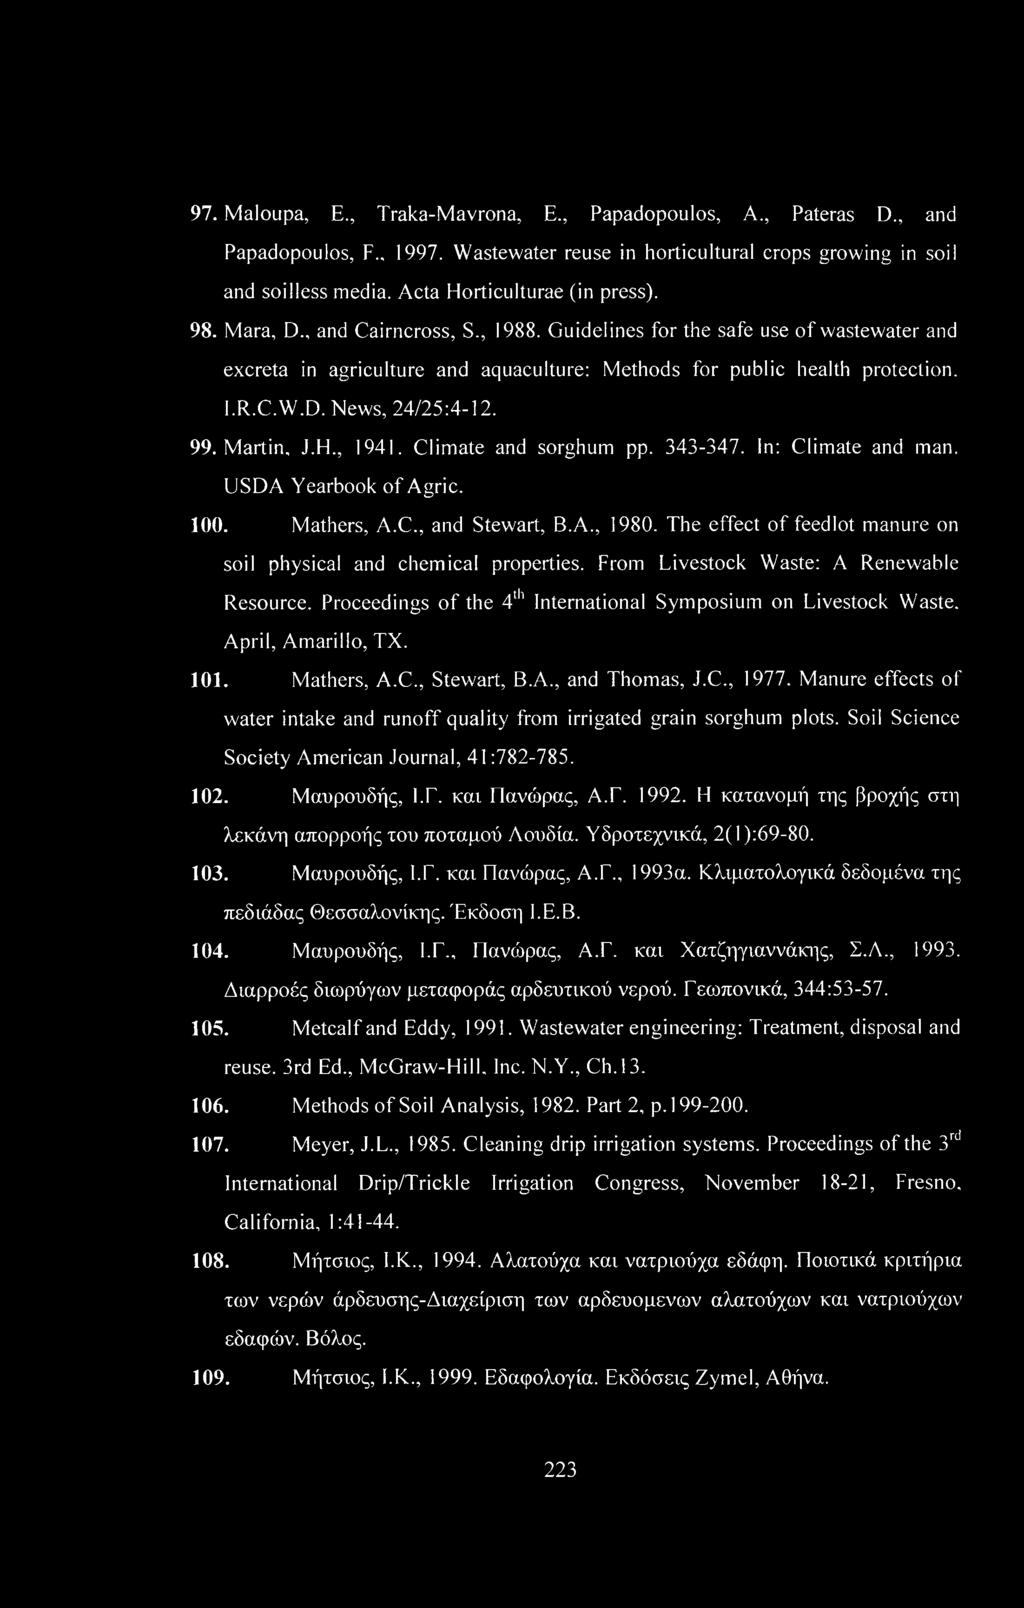 Martin, J.H., 1941. Climate and sorghum pp. 343-347. In: Climate and man. USDA Yearbook of Agric. 100. Mathers, A.C., and Stewart, B.A., 1980.